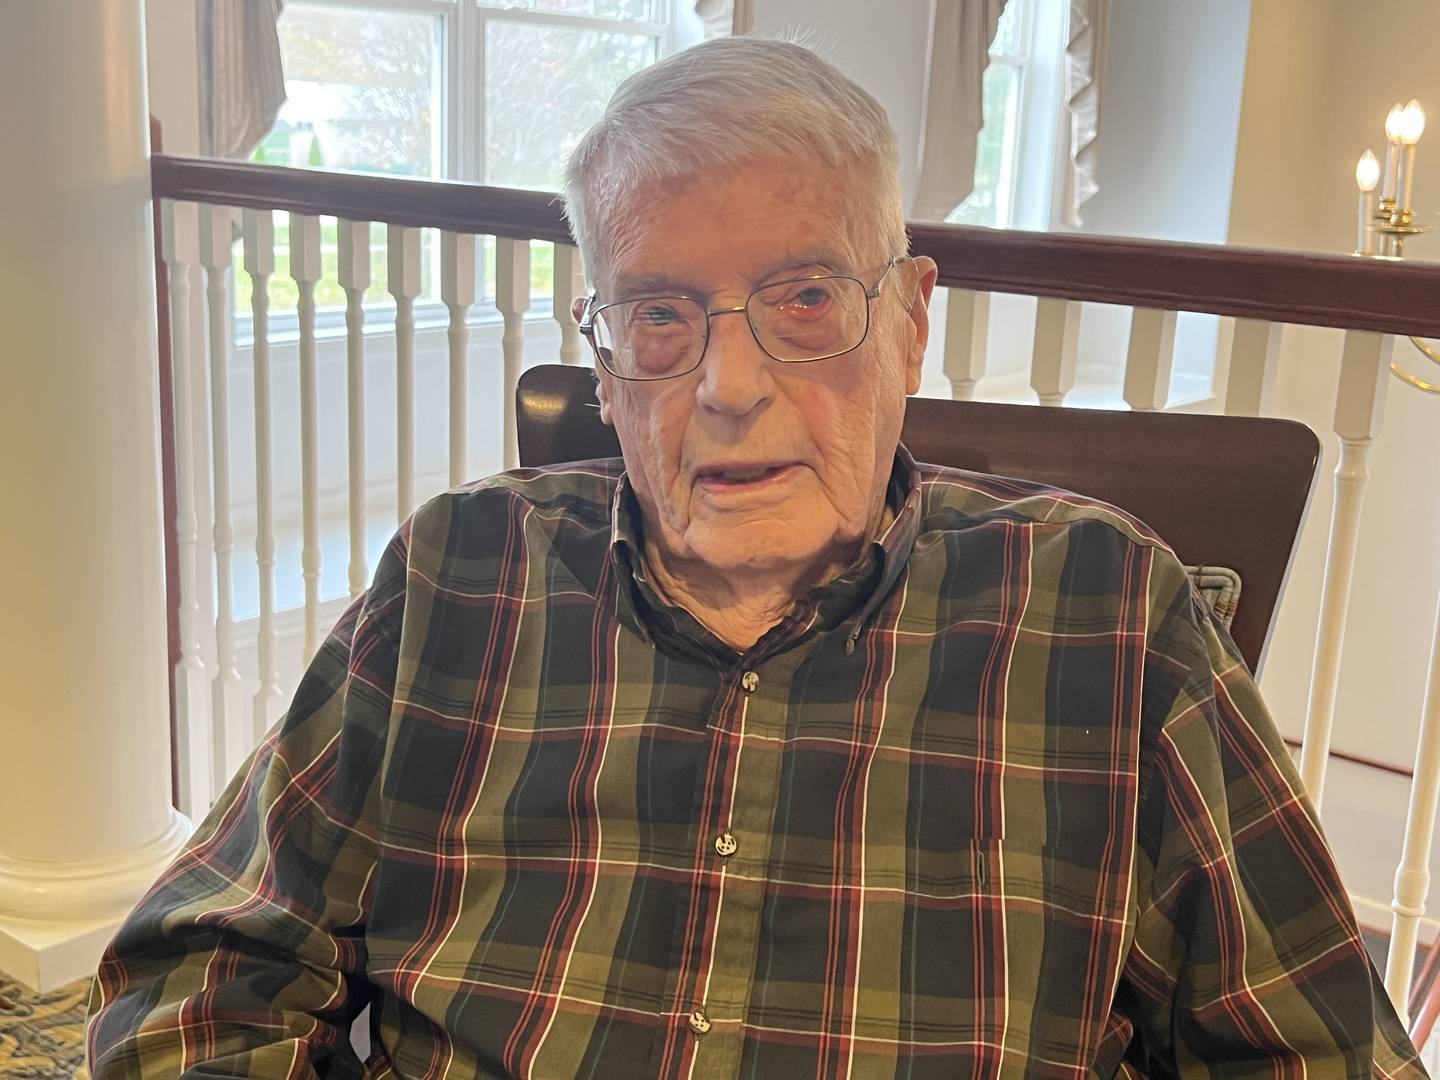 Ken Cooper, a veteran of World War 2, talks about his experience as a soldier on Nov. 4, 2022.